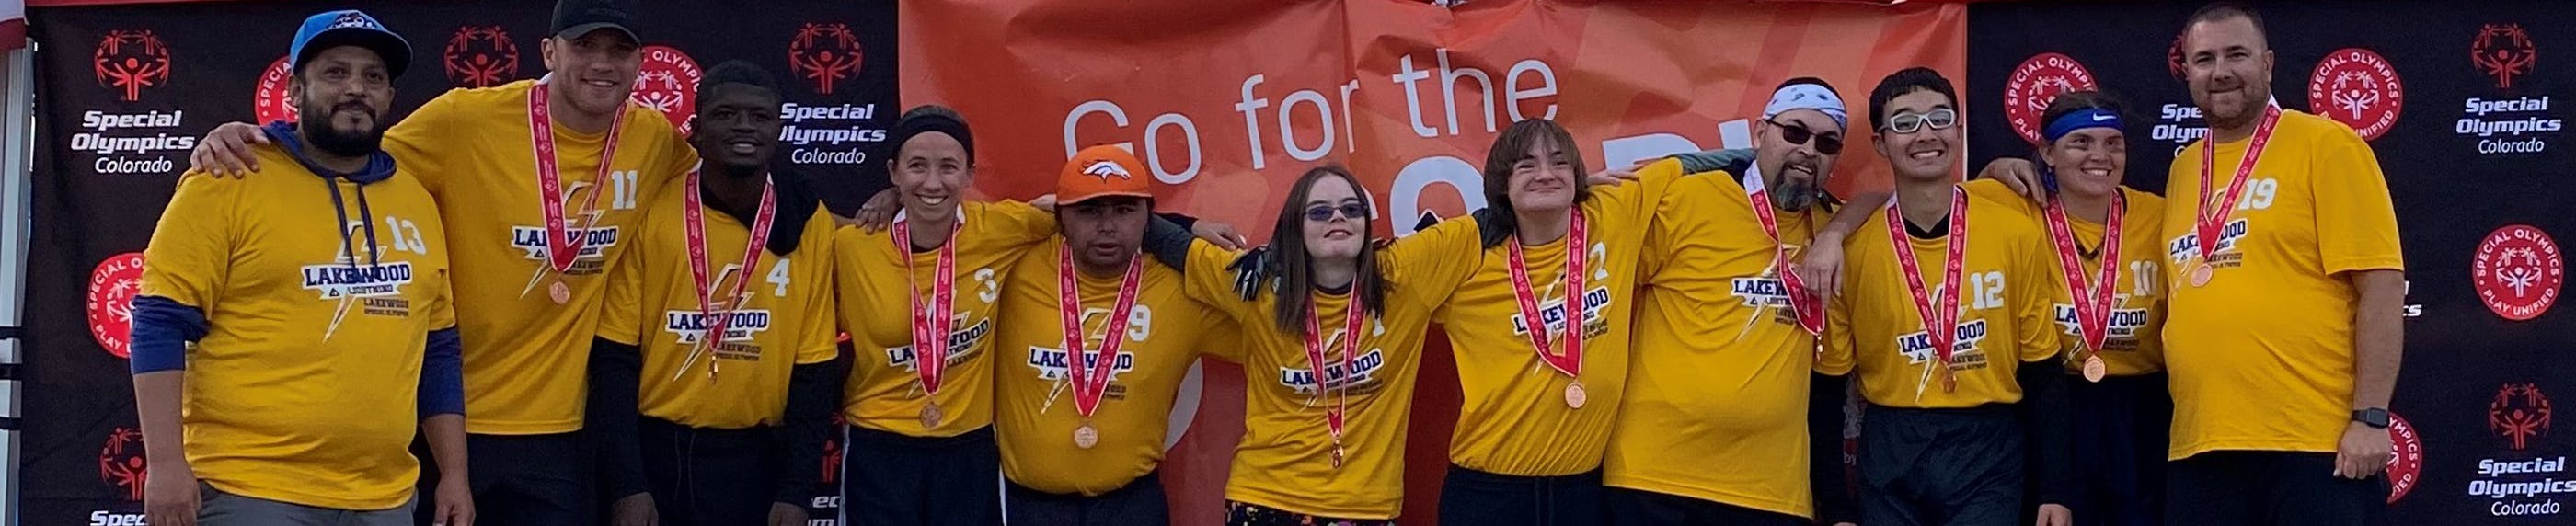 Shows a group of Special Olympics participants with their medals at an Special Olympics event.